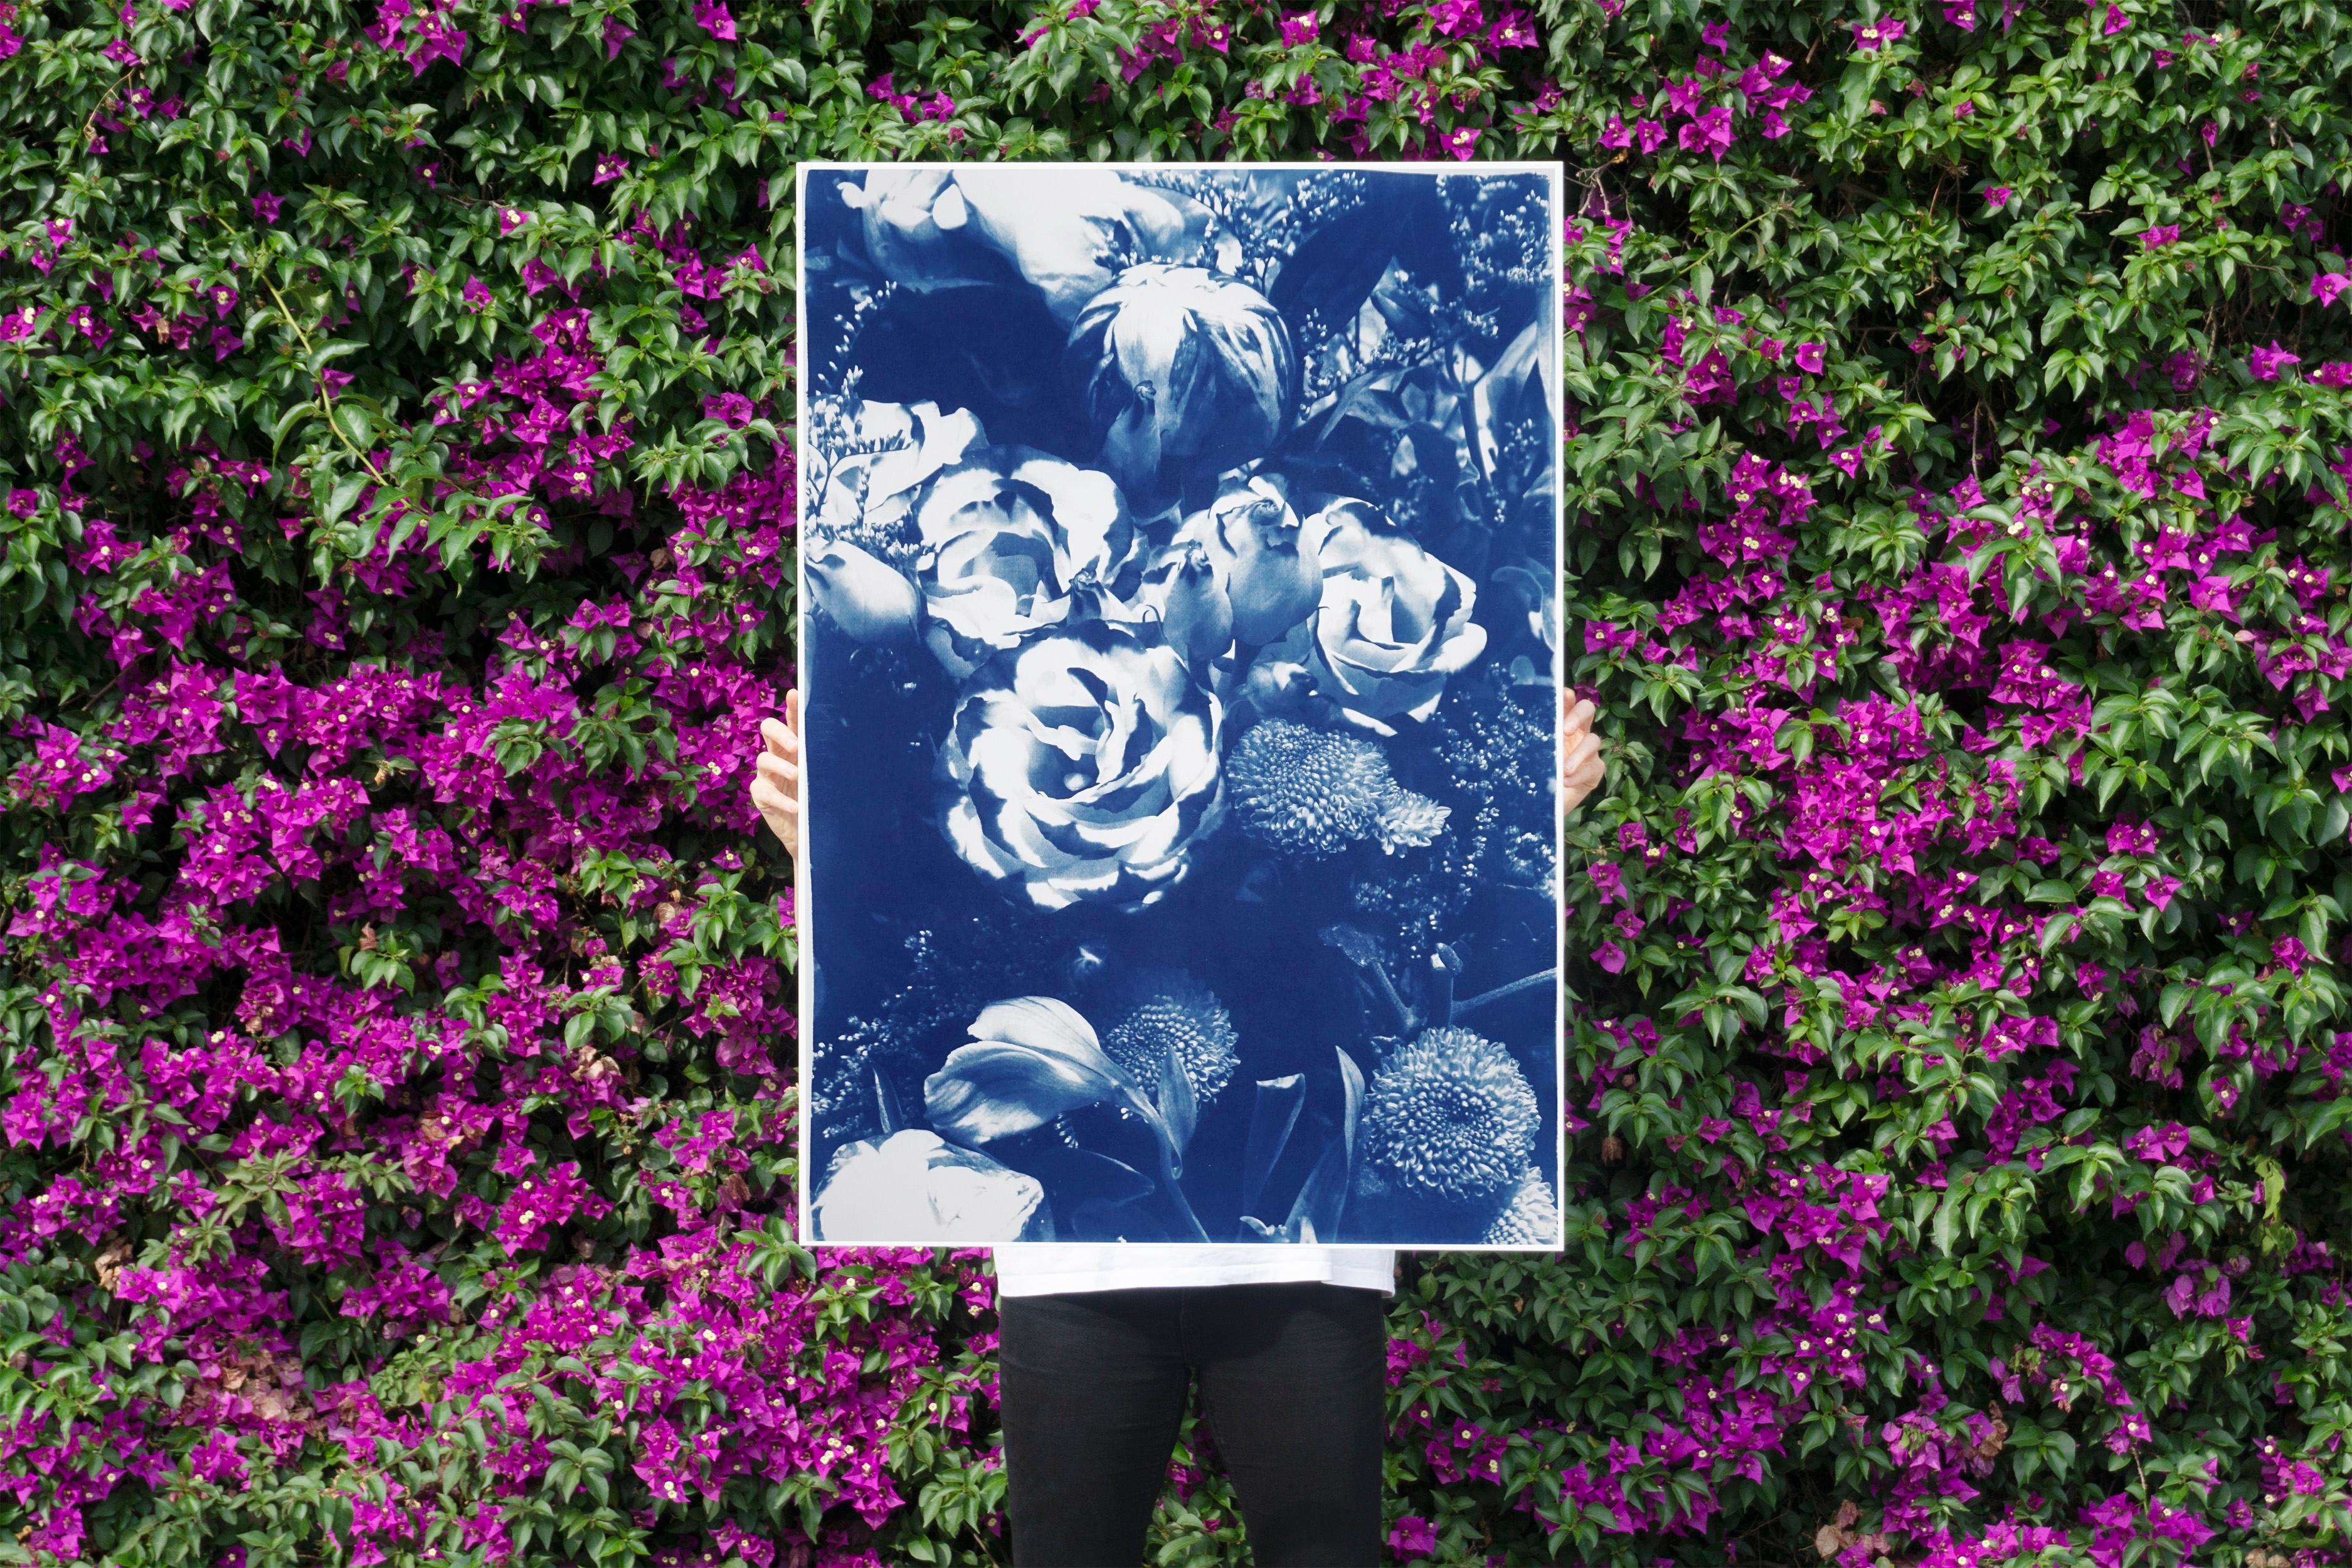 This is an exclusive handprinted limited edition cyanotype of a gorgeous blue bouquet. 

Details:
+ Title: Blue Flower Bouquet
+ Year: 2020
+ Edition Size: 100
+ Stamped and Certificate of Authenticity provided
+ Measurements : 70x100 cm (28x 40